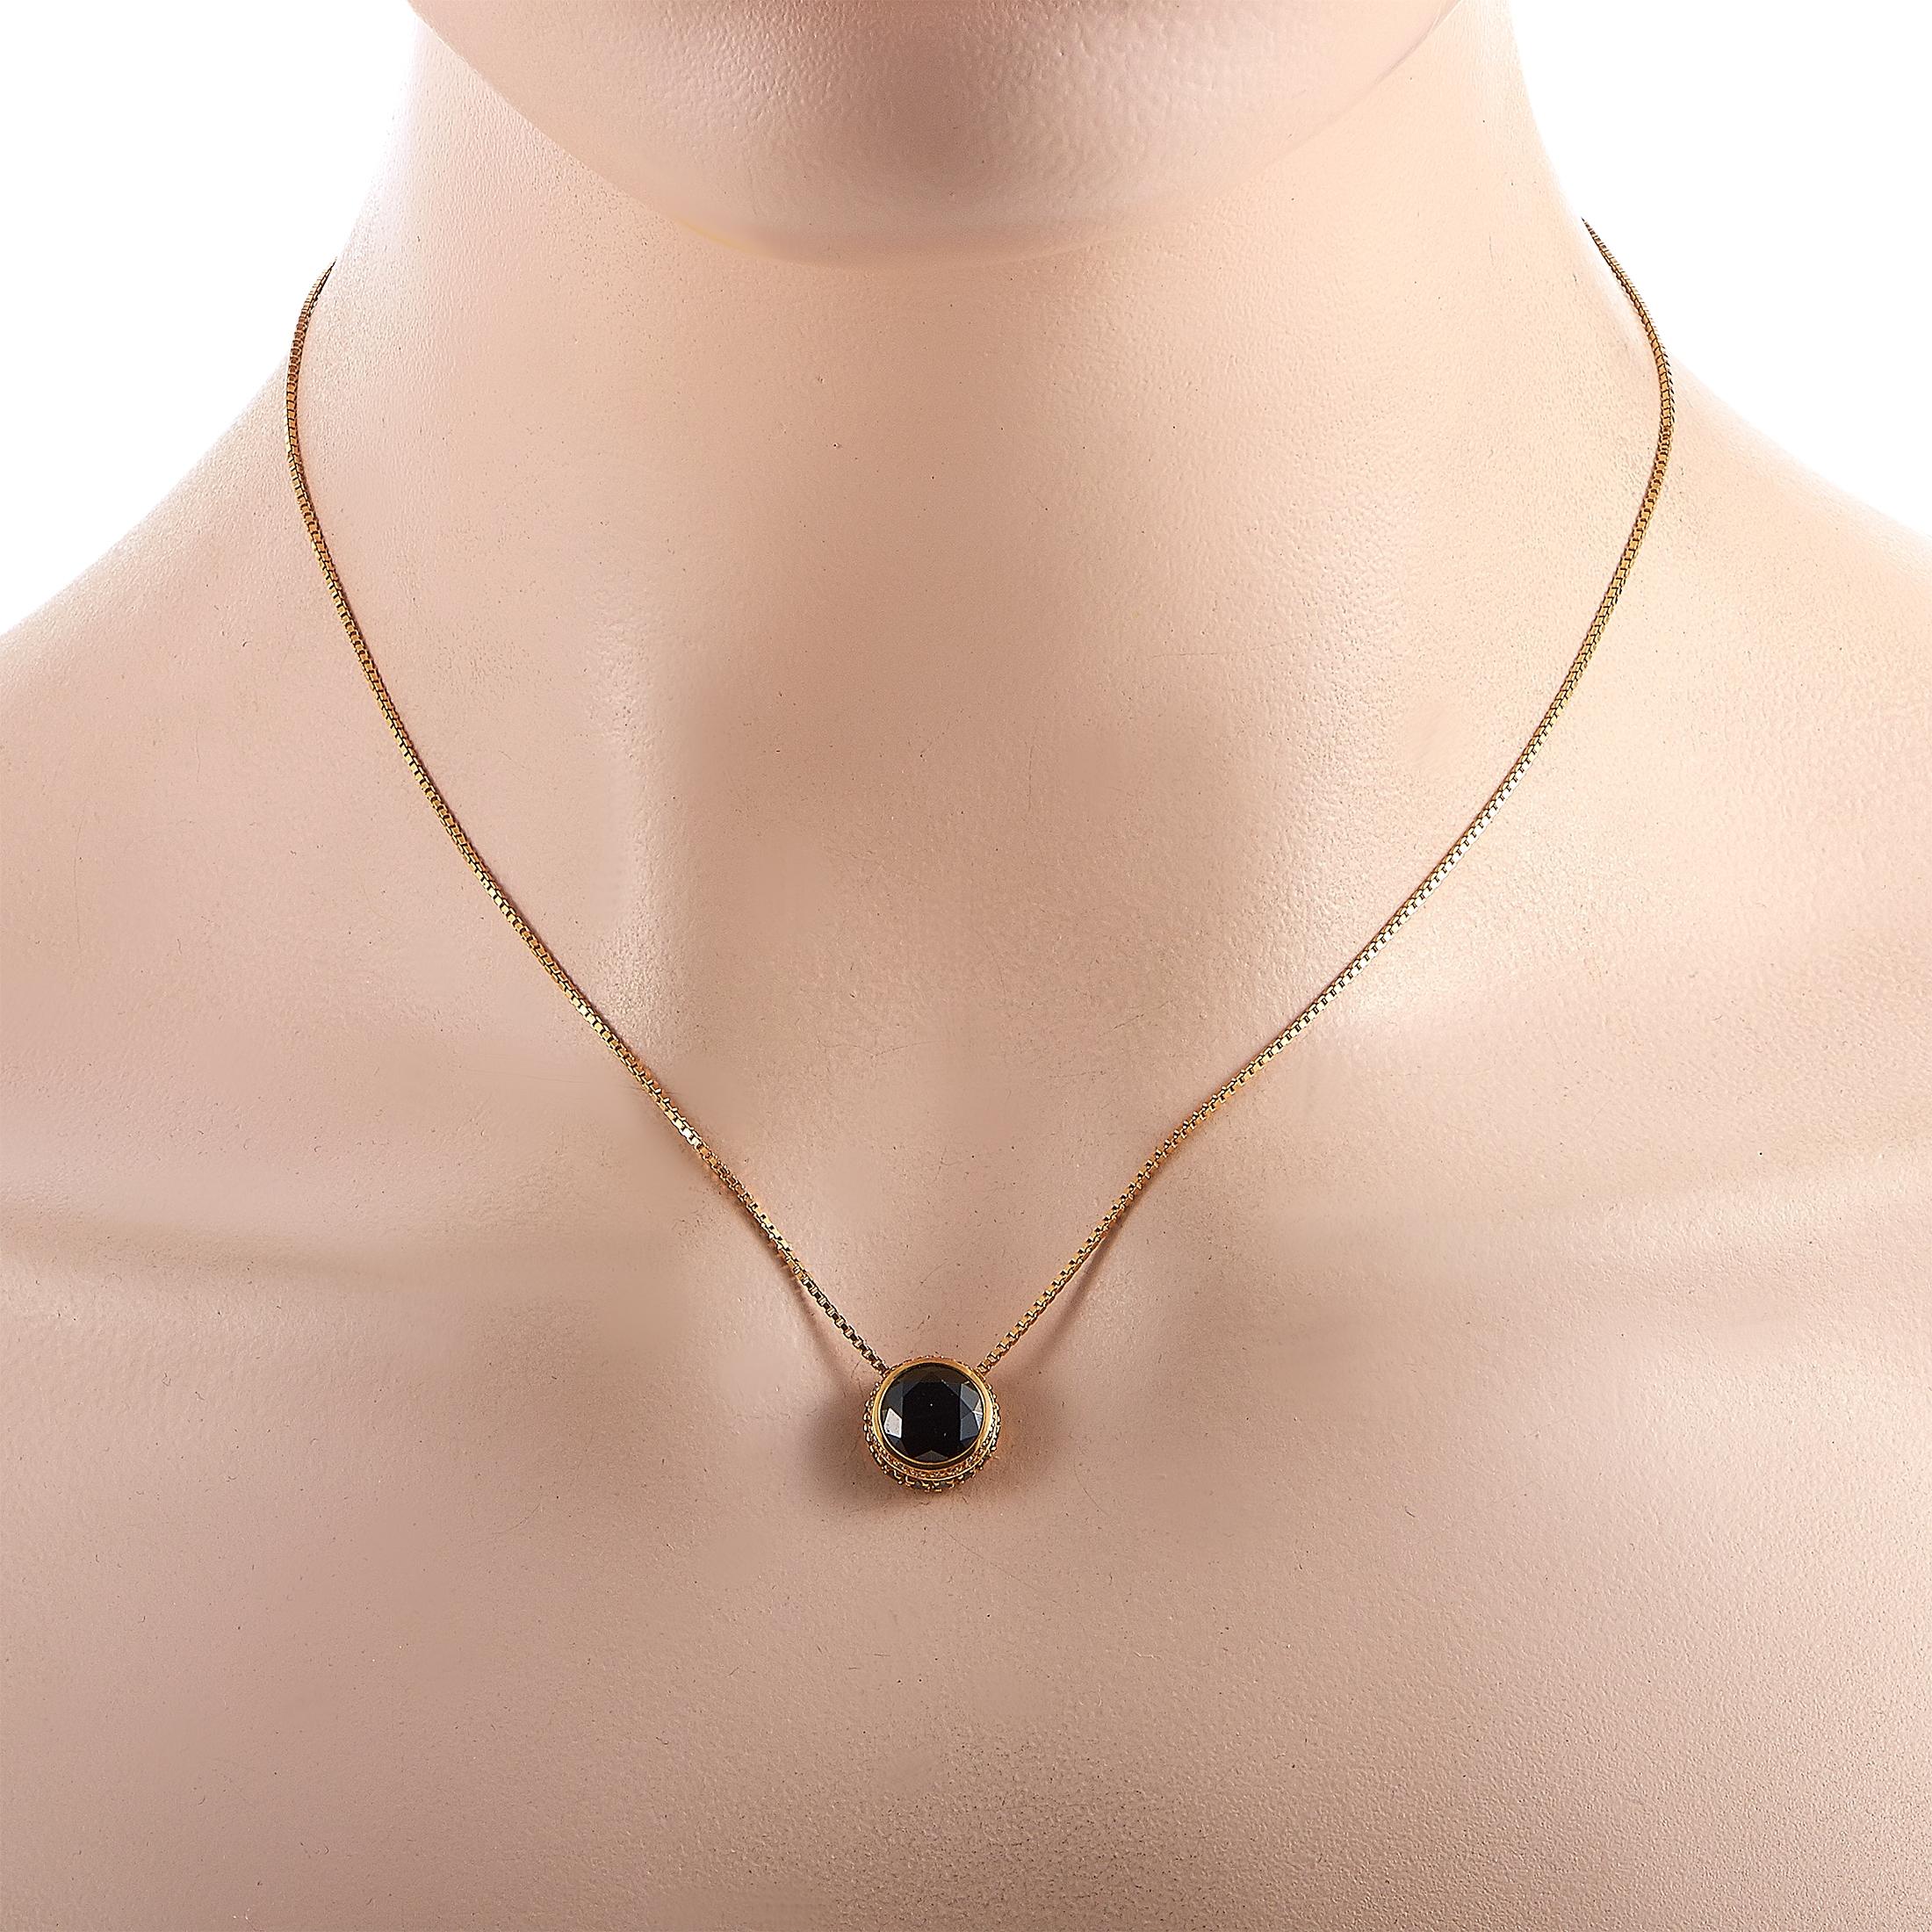 This Oro Trend necklace is made of 18K yellow gold and embellished with an onyx and with white and black diamonds that total 0.12 and 0.38 carats respectively. The necklace weighs 7 grams and is presented with a 16” chain, boasting a pendant that